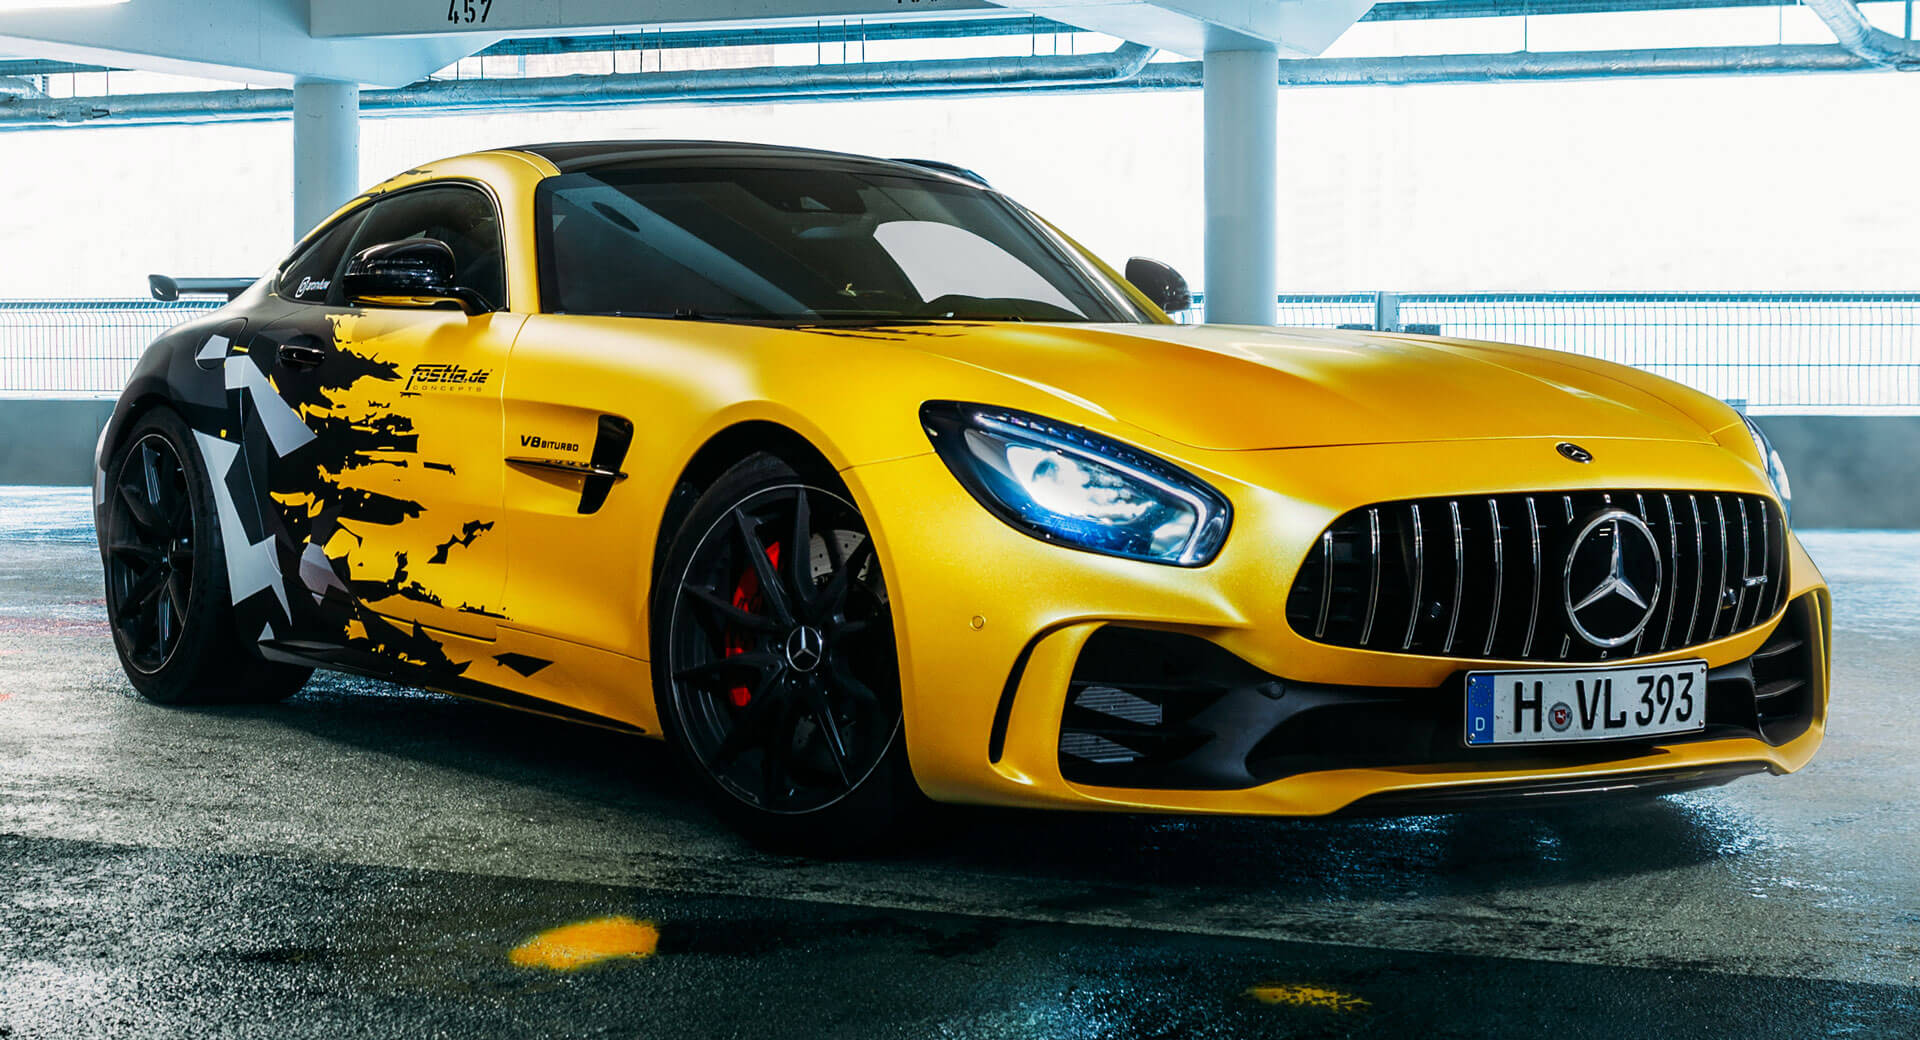 Fostla’s Mercedes-AMG GT R Gets 641 HP, Urban-Camo-And-Yellow Wrap | Carscoops